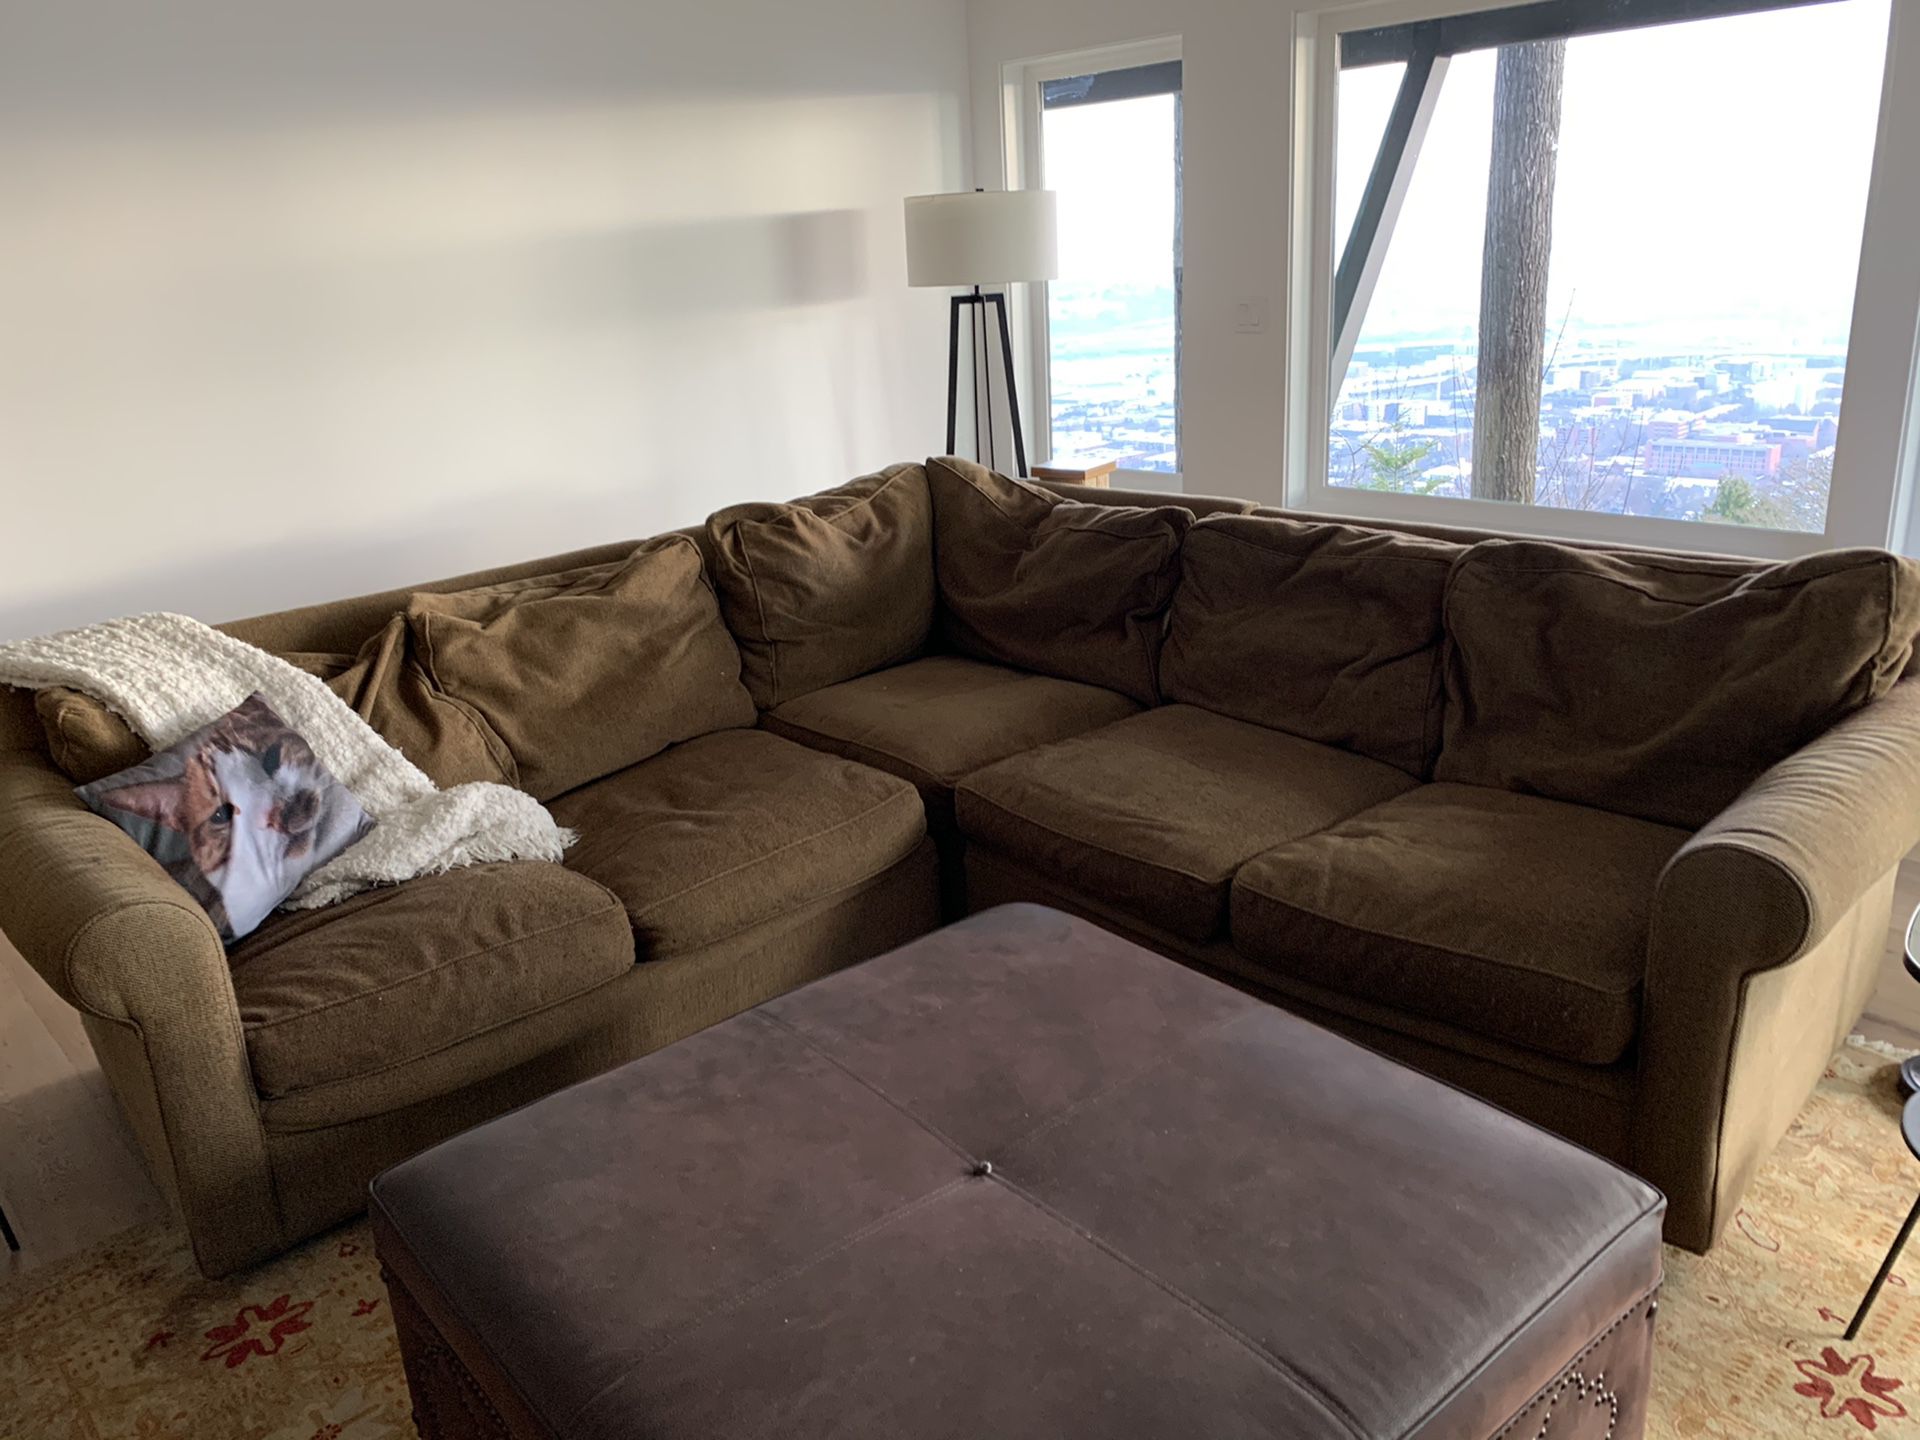 FREE Crate & Barrel Sectional